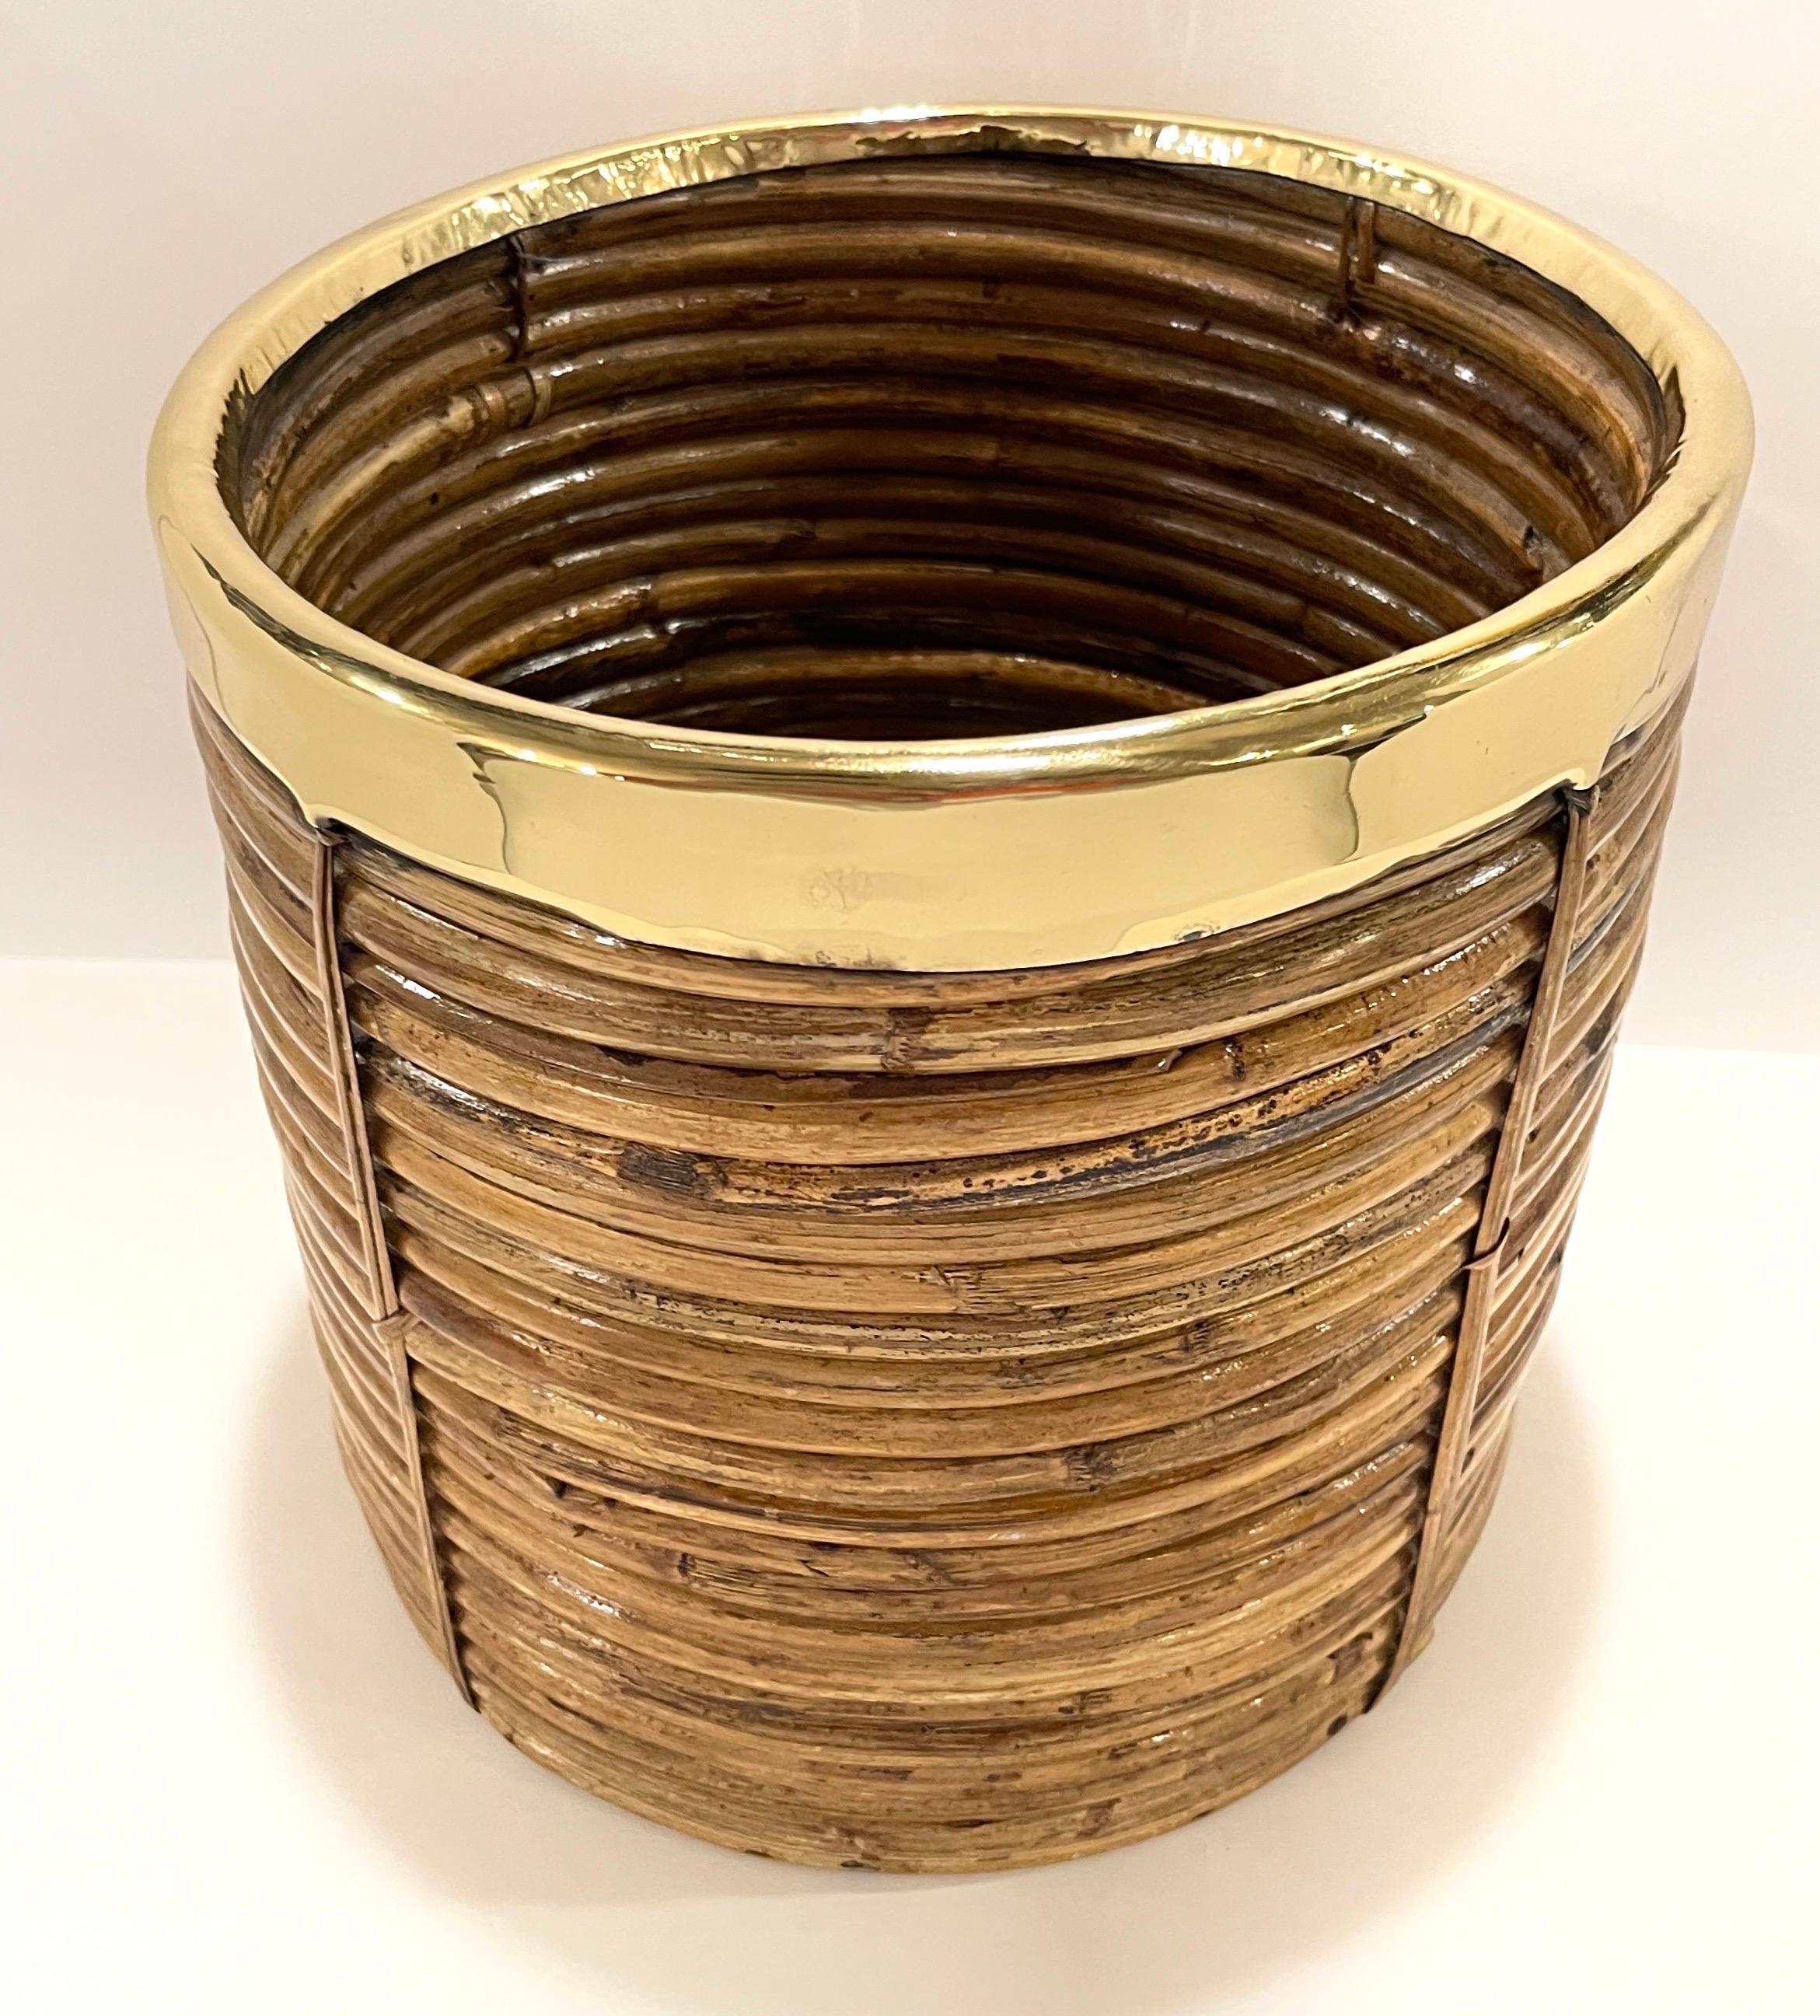 Mid-Century Modern 1970s Italian Bamboo/ Rattan Wastepaper Basket with Polished Brass Rim For Sale